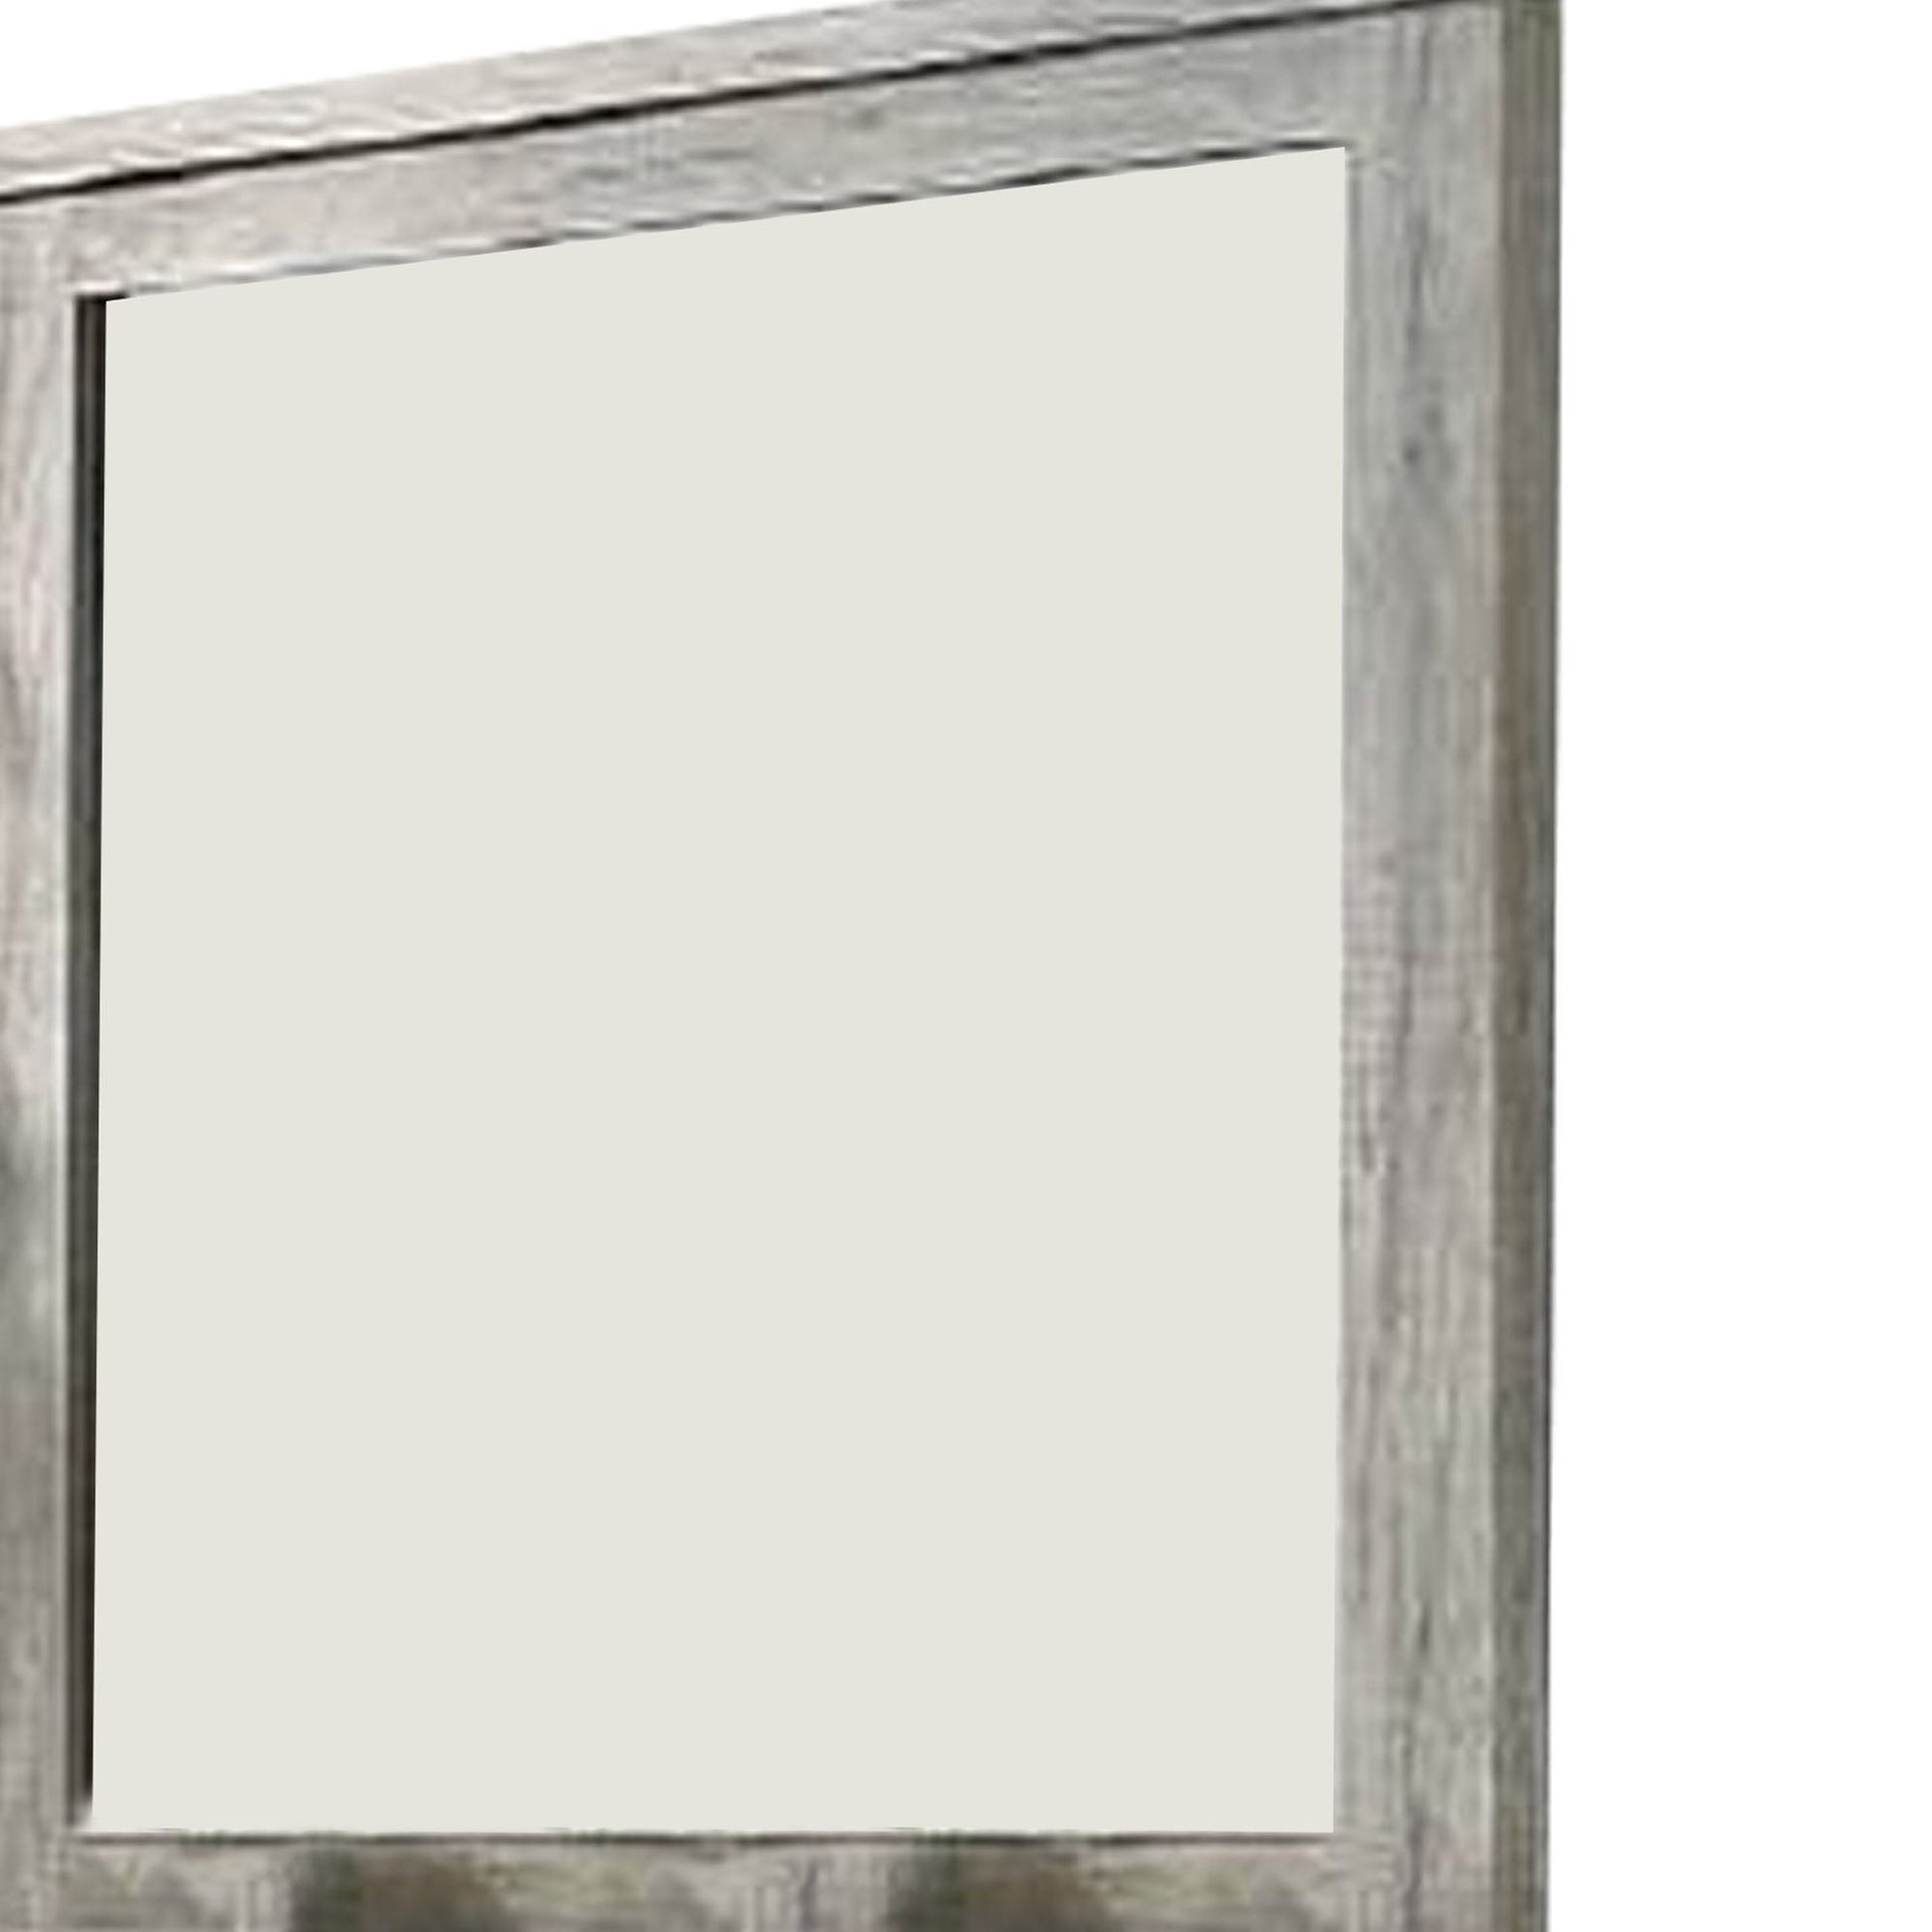 Benzara Gray Wall Mirror With Rectangular Frame and Molded Details